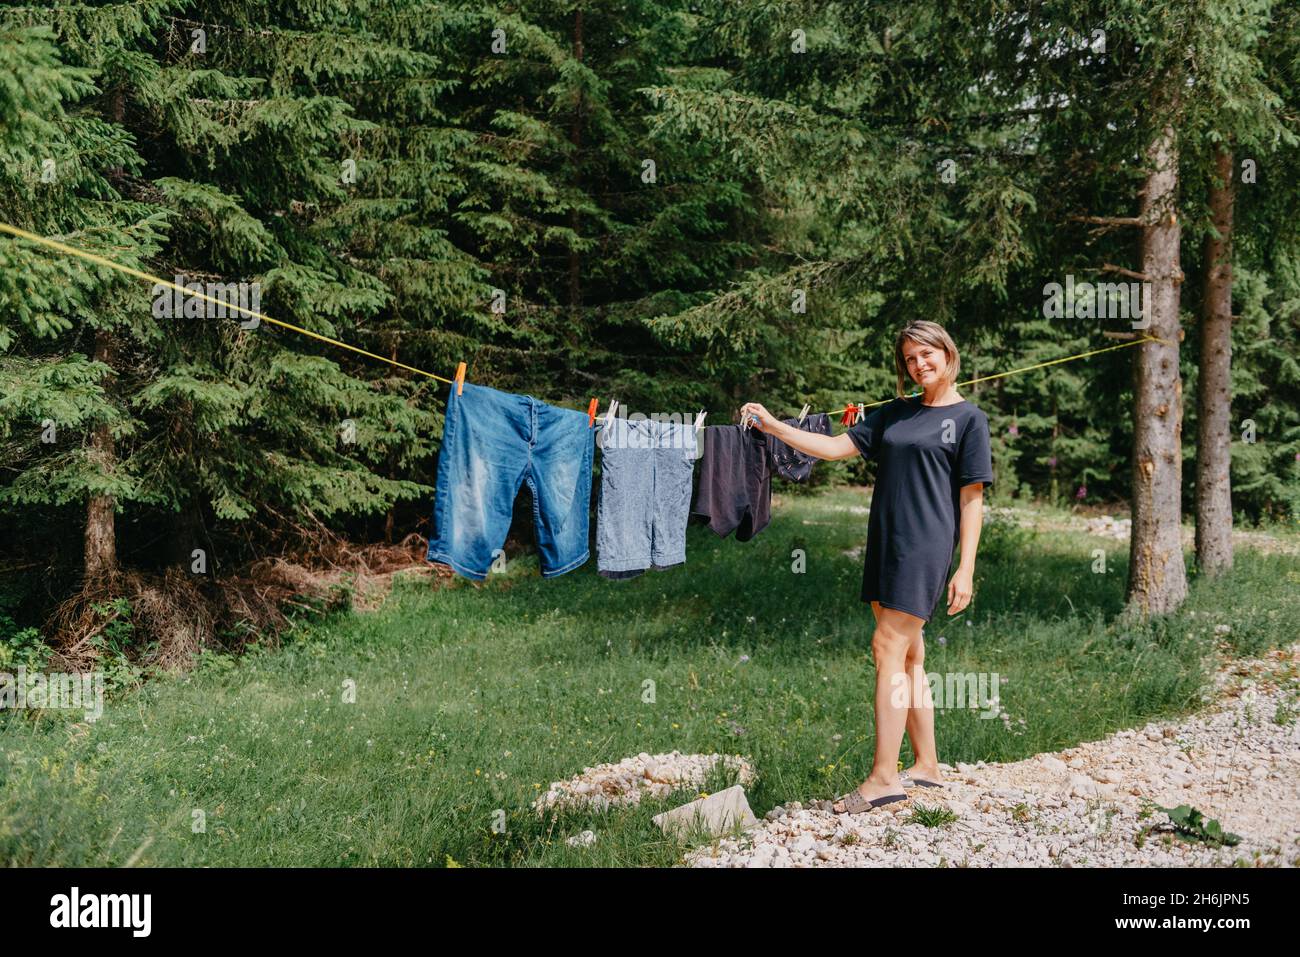 https://c8.alamy.com/comp/2H6JPN5/young-woman-hangs-clothes-on-clothesline-outdoors-in-the-courtyard-of-a-village-cottage-house-summer-and-freshness-concept-washing-day-cute-girl-2H6JPN5.jpg